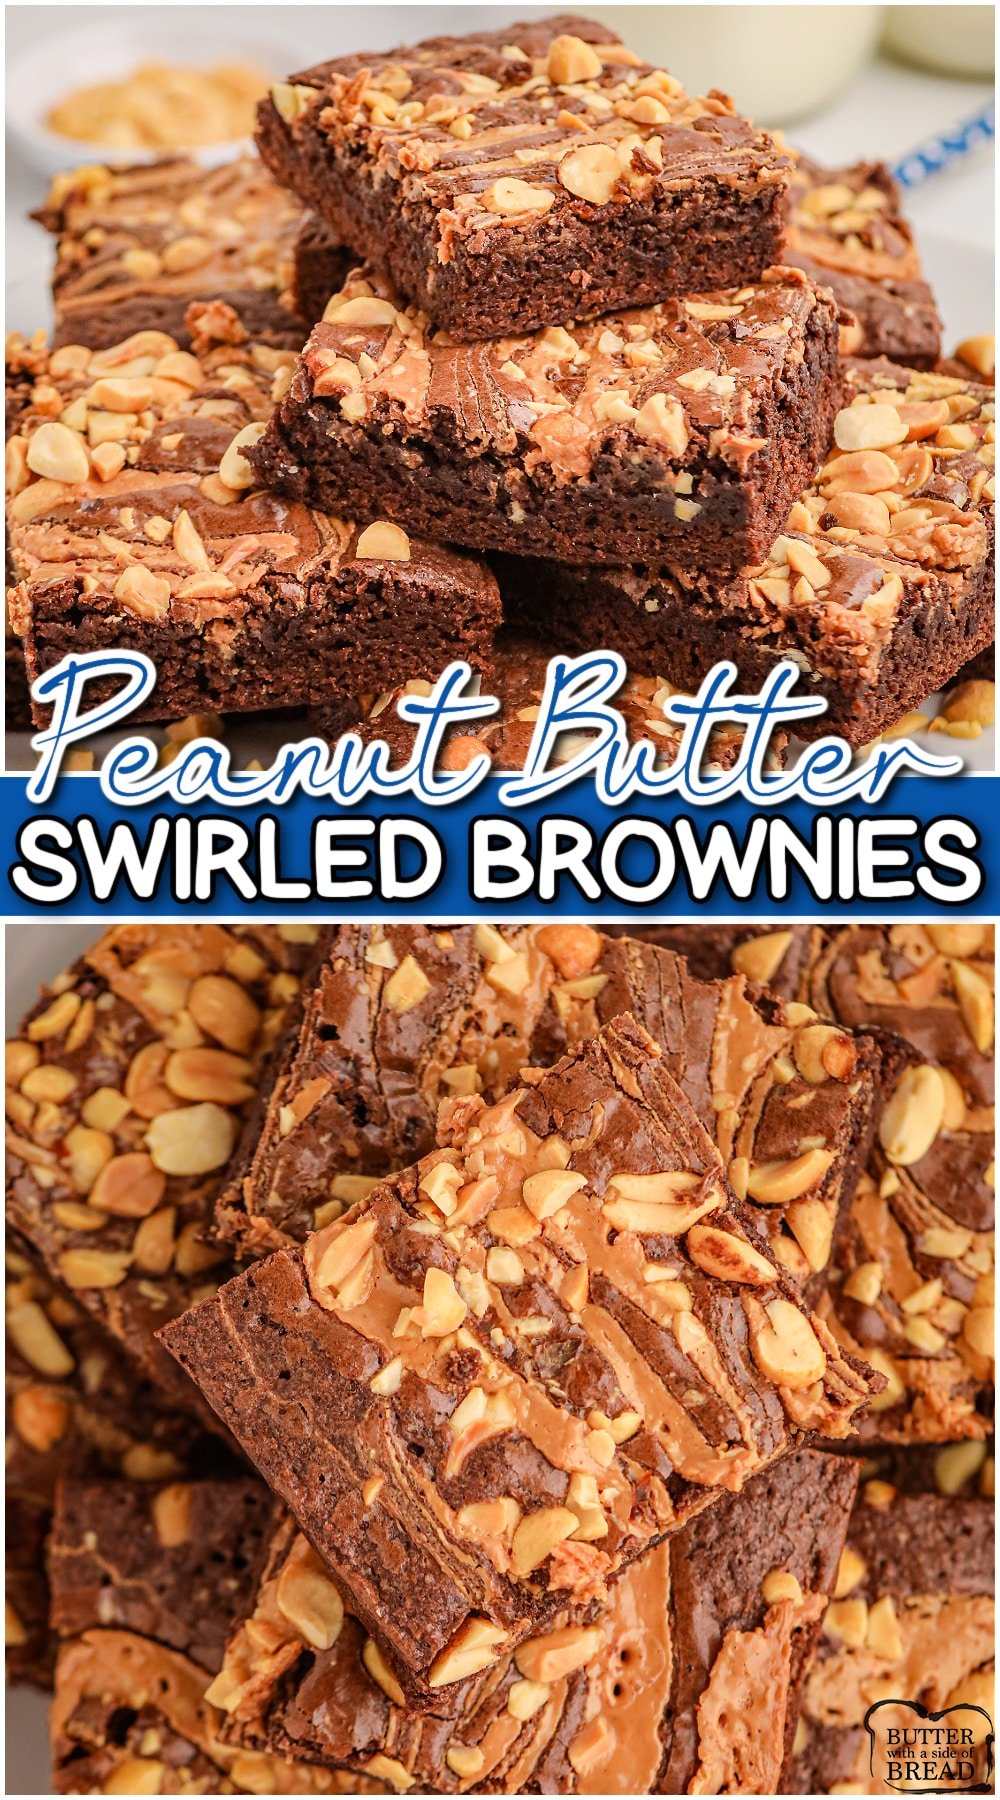 Peanut Butter Brownies😍 with Box Mix are an easy take on traditional brownies! Fudgy, decadent brownies with an incredible swirl of peanut butter everyone loves!